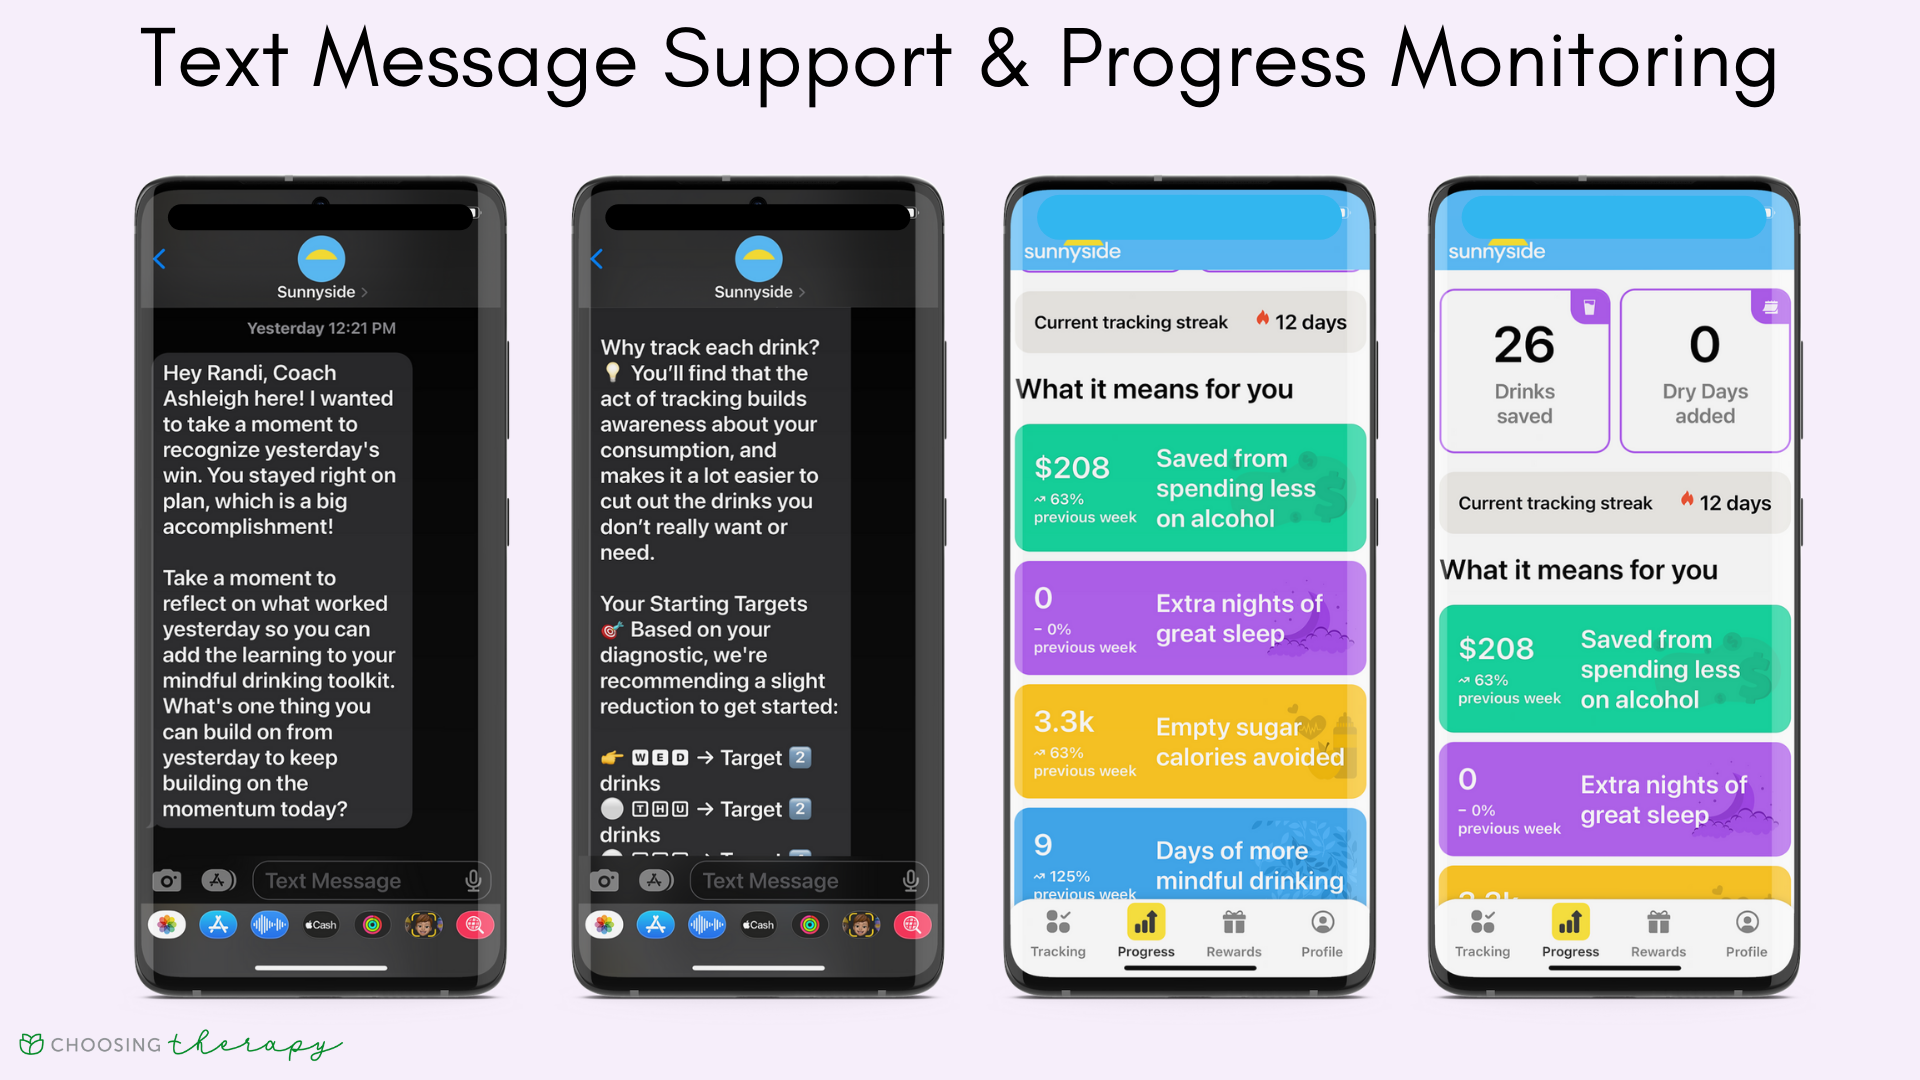 Sunnyside app review 2022 - two images of text support and two images of progress dashboard